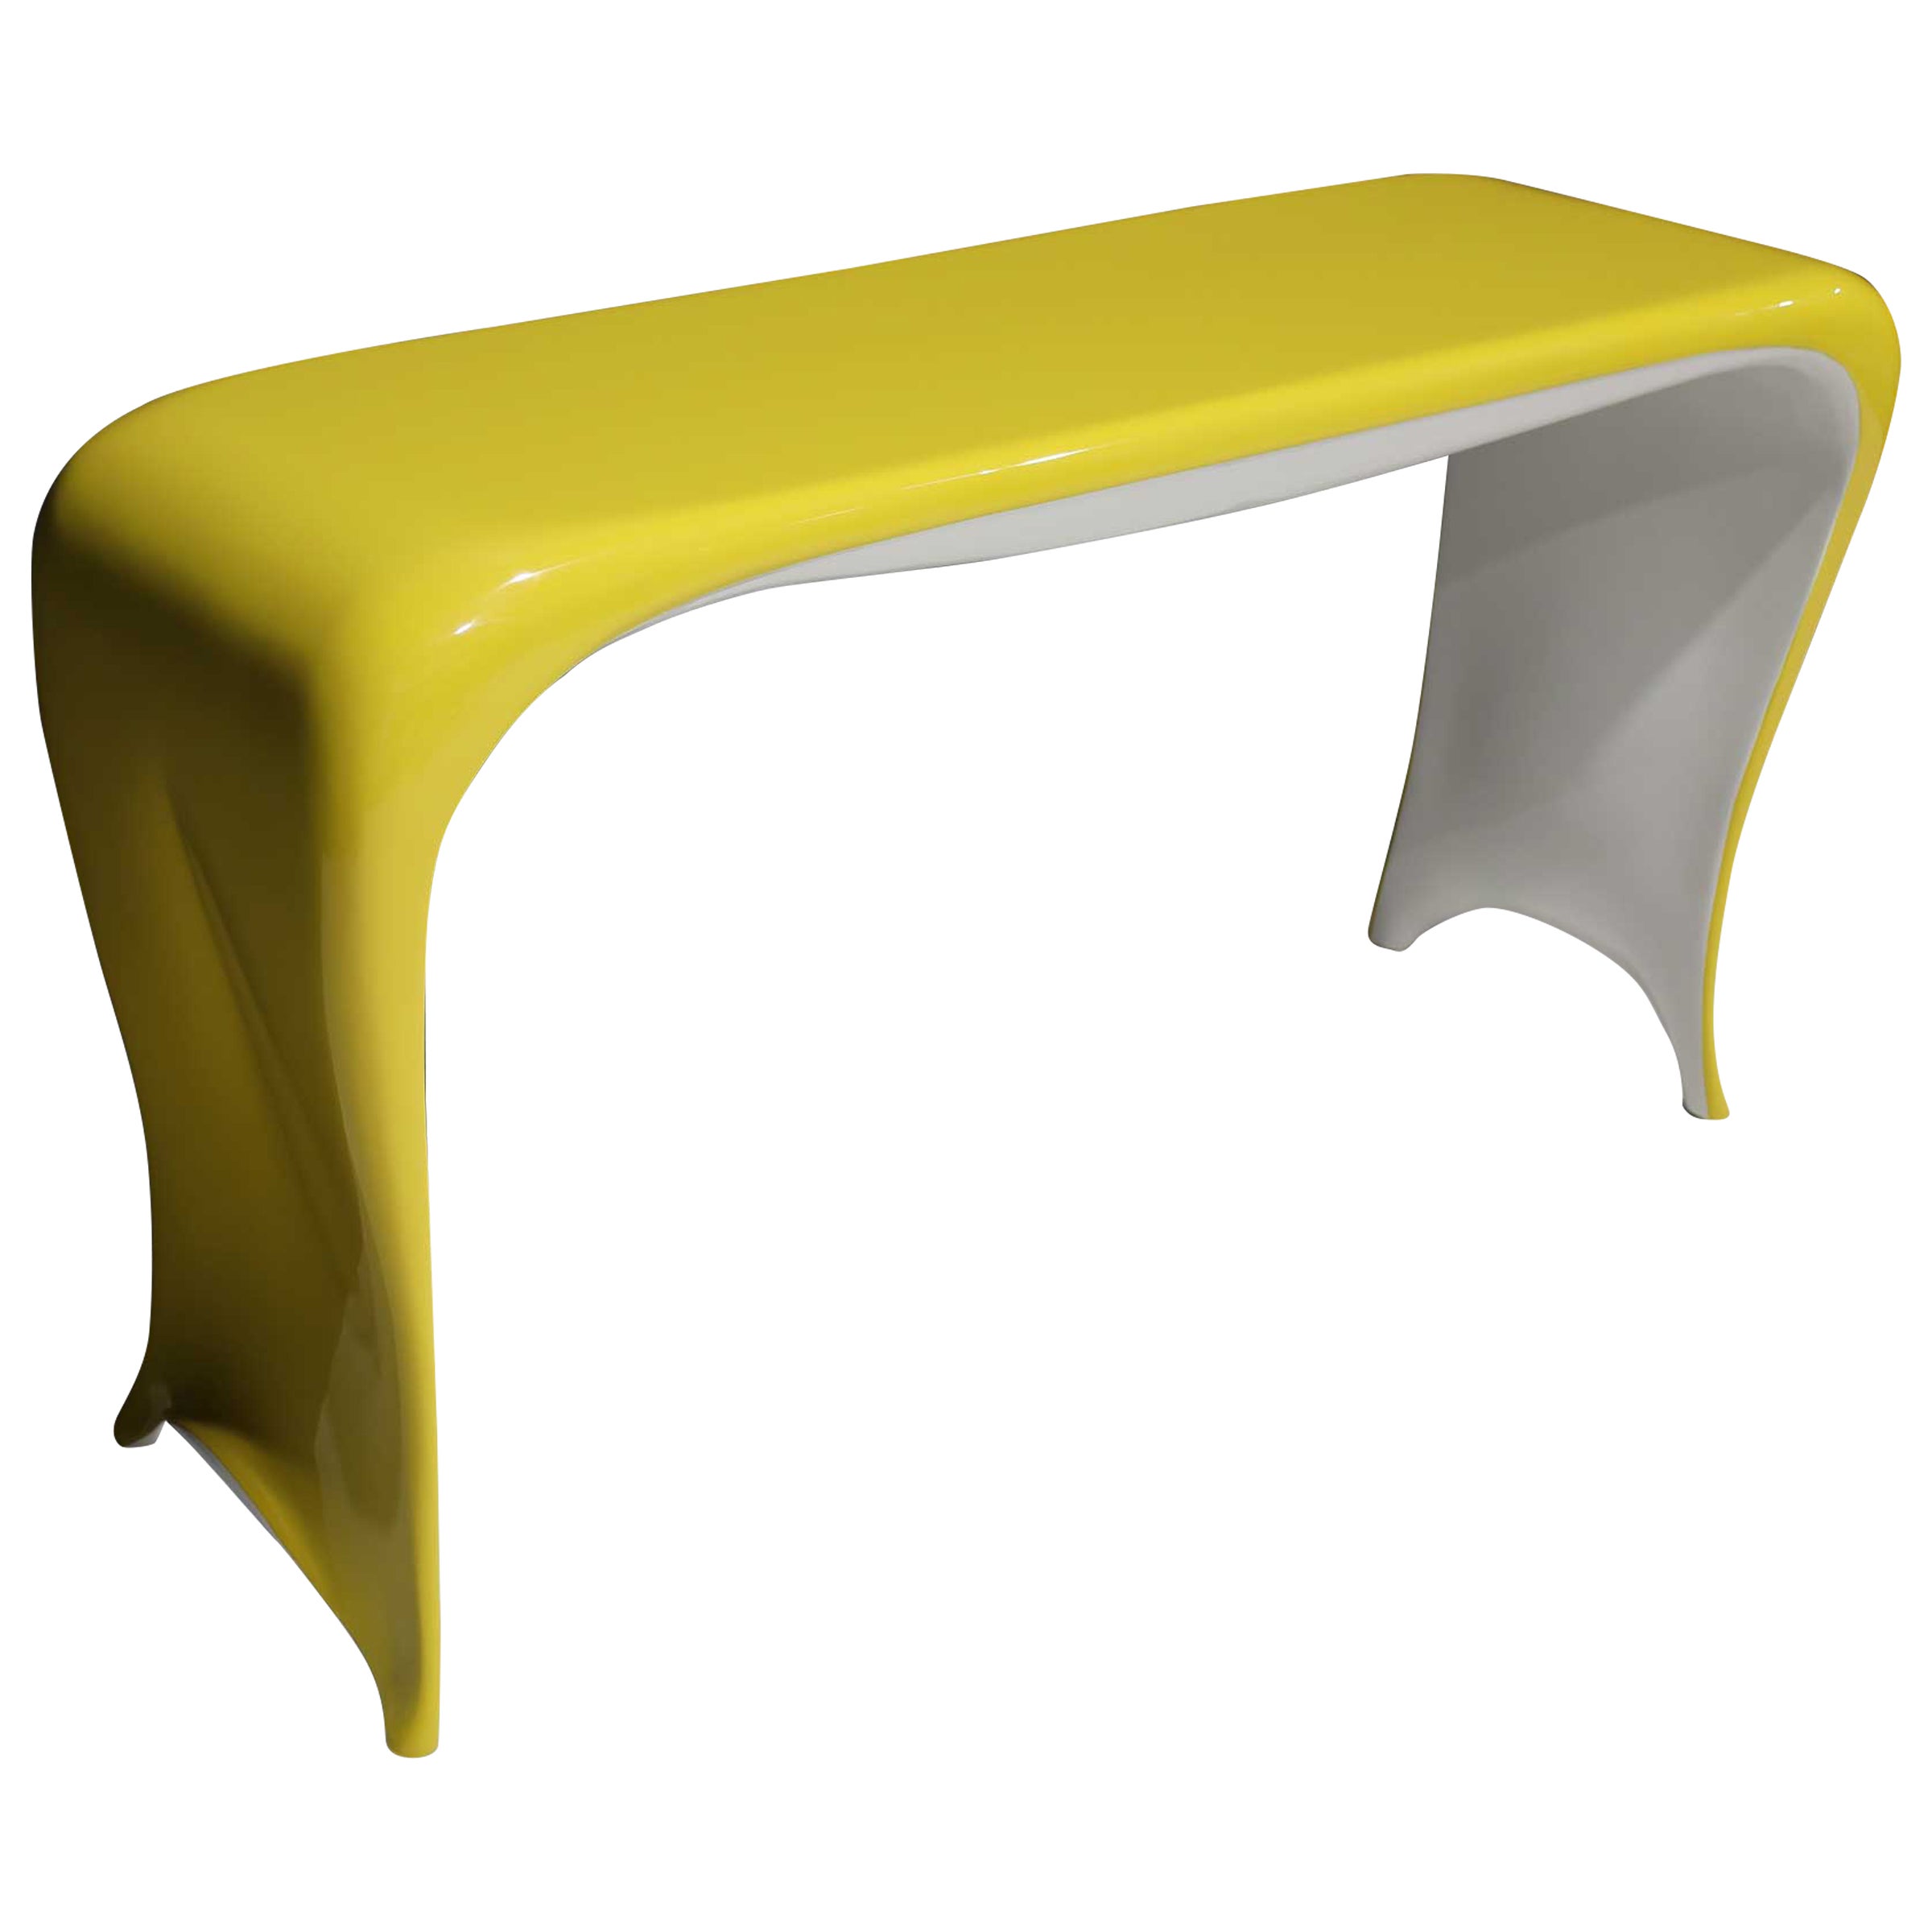 Goddess Console by Bruce Berman, 1985, in Yellow and White Lacquer For Sale